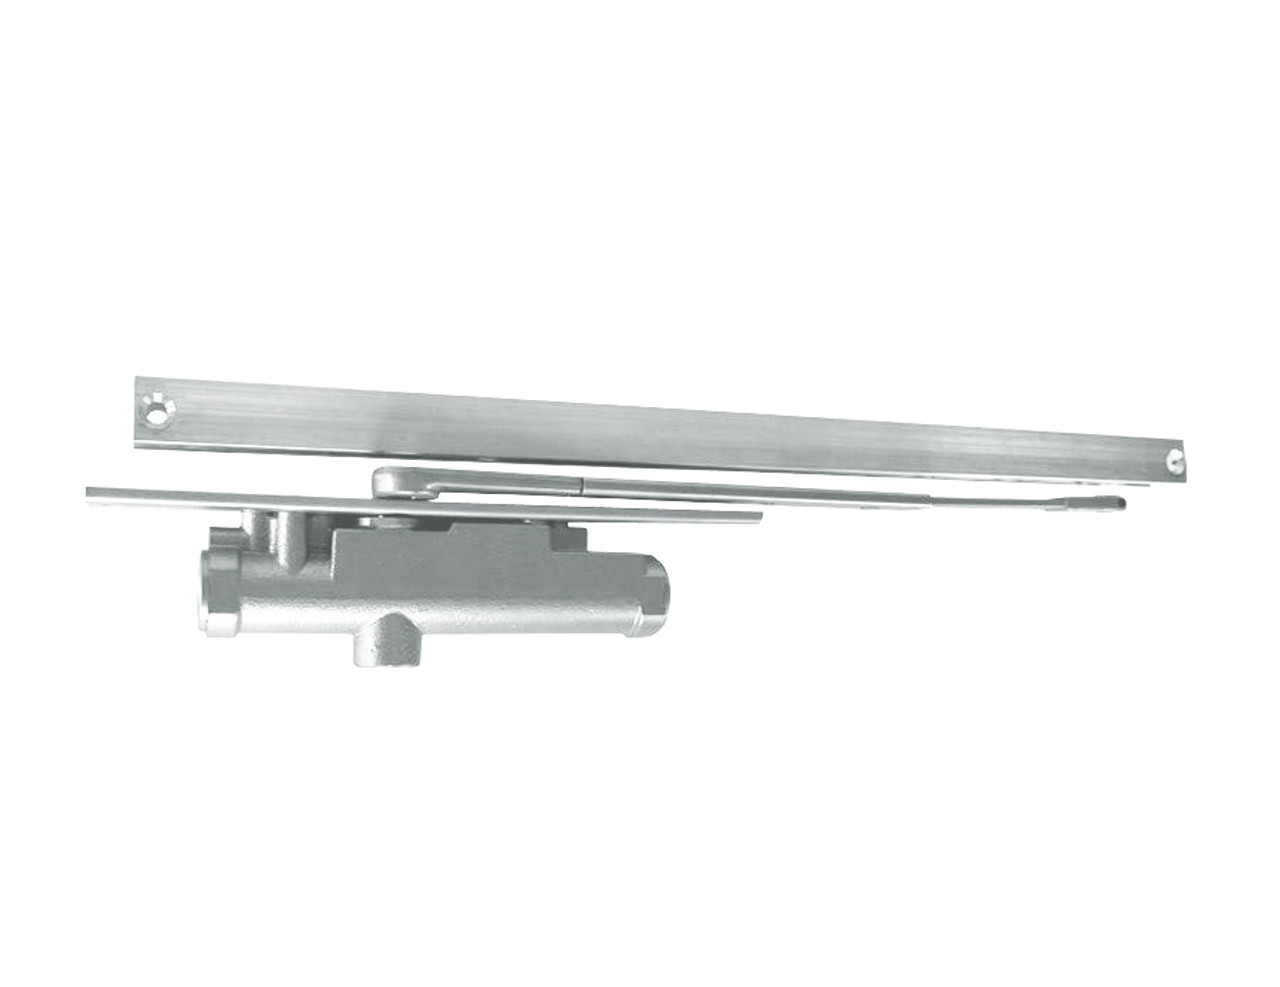 3131-H-Bumper-RH-US26D LCN Door Closer Hold Open Track with Bumper in Satin Chrome Finish